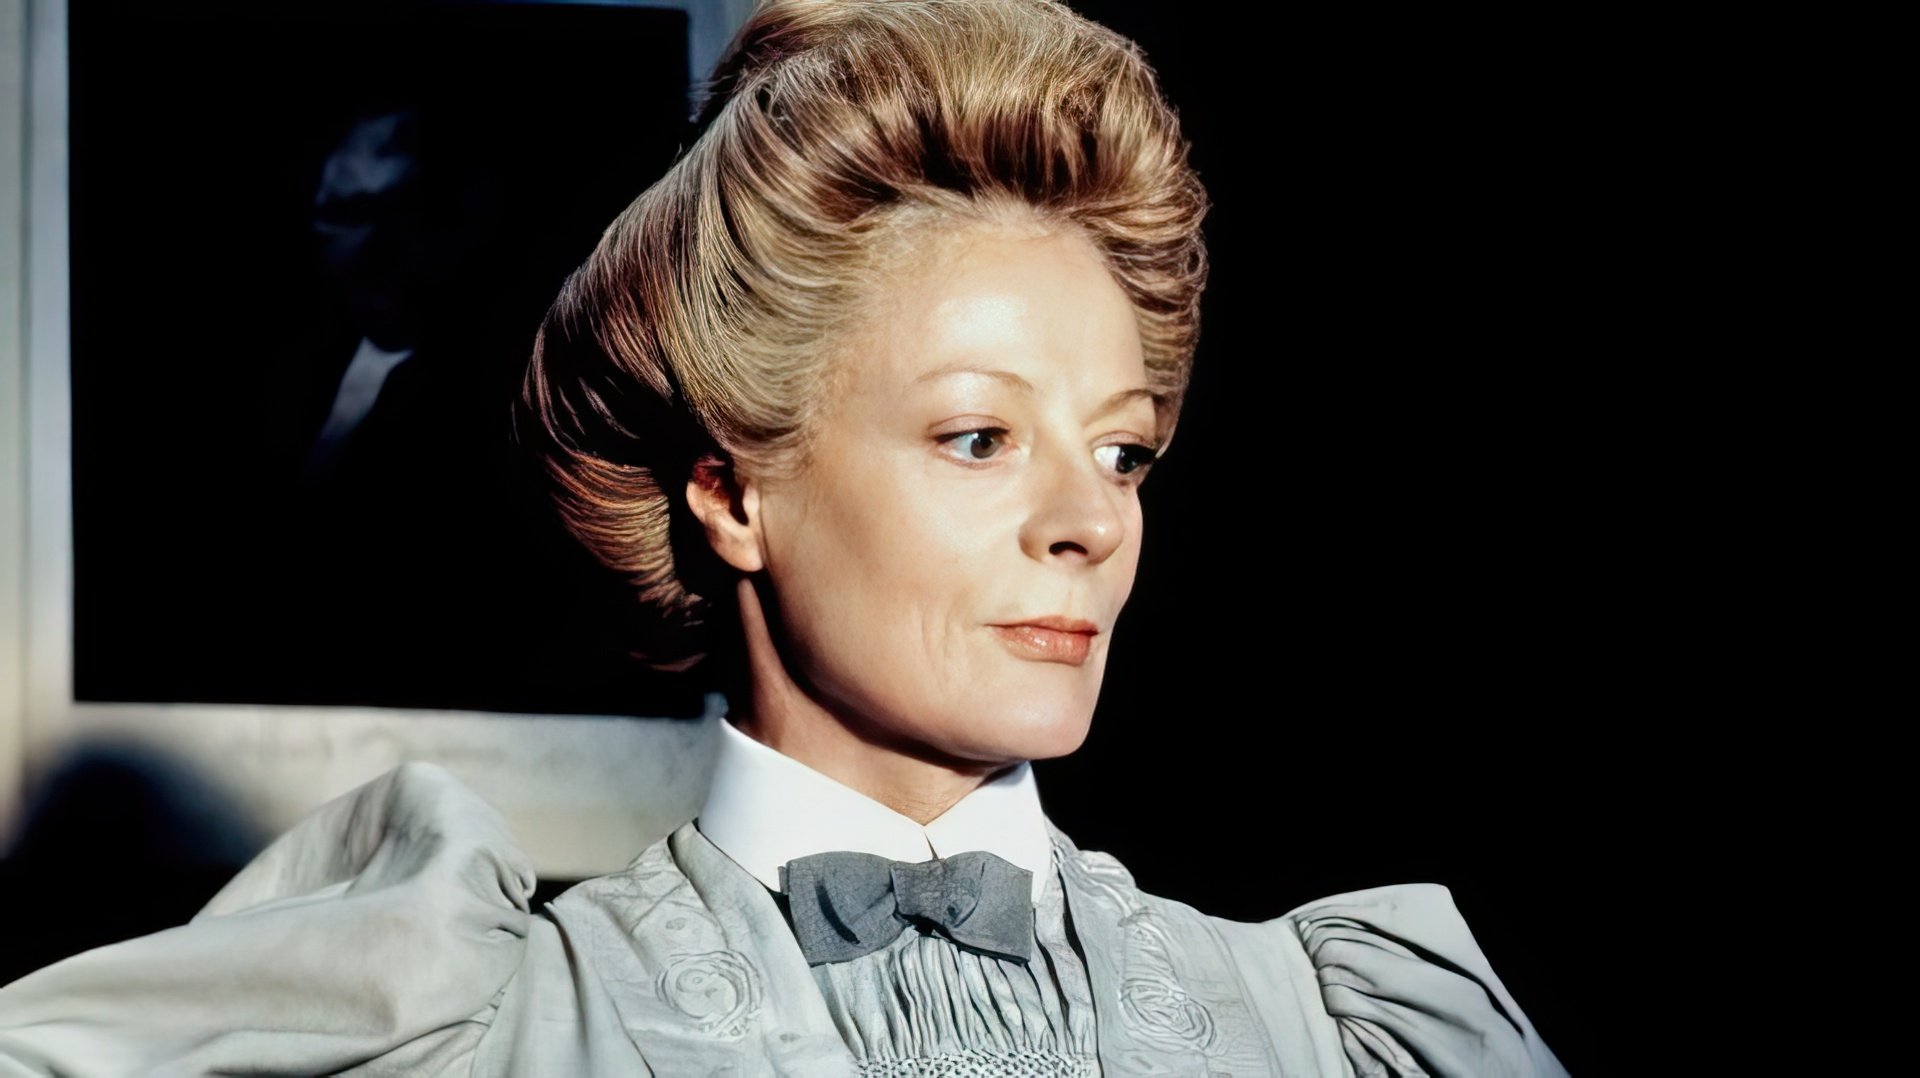 Maggie Smith in A Room with a View